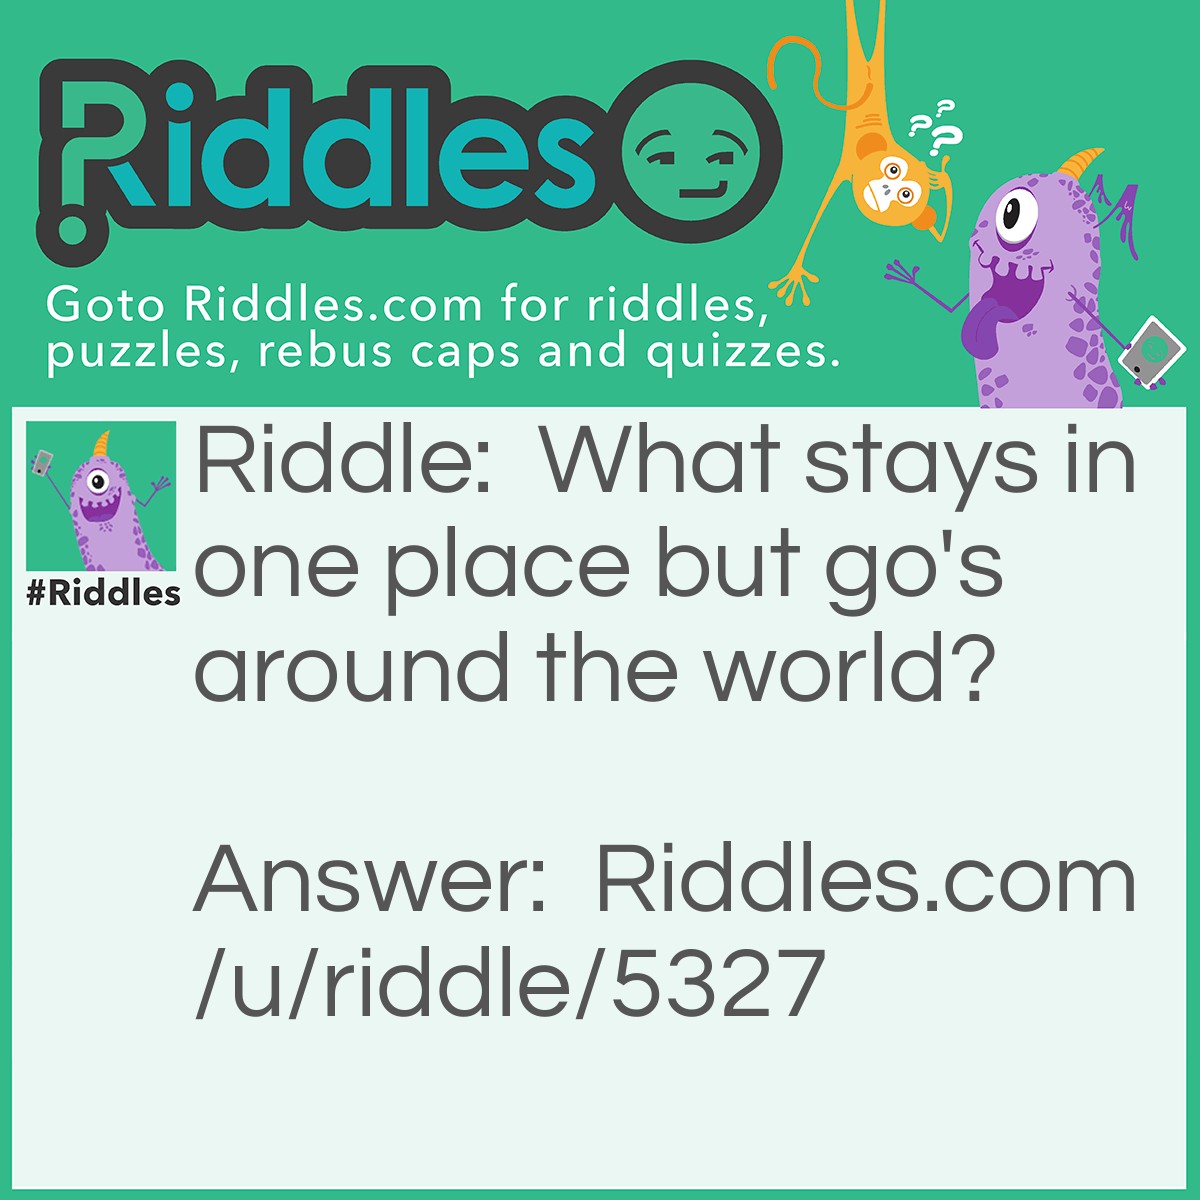 Riddle: What stays in one place but go's around the world? Answer: Stamp.